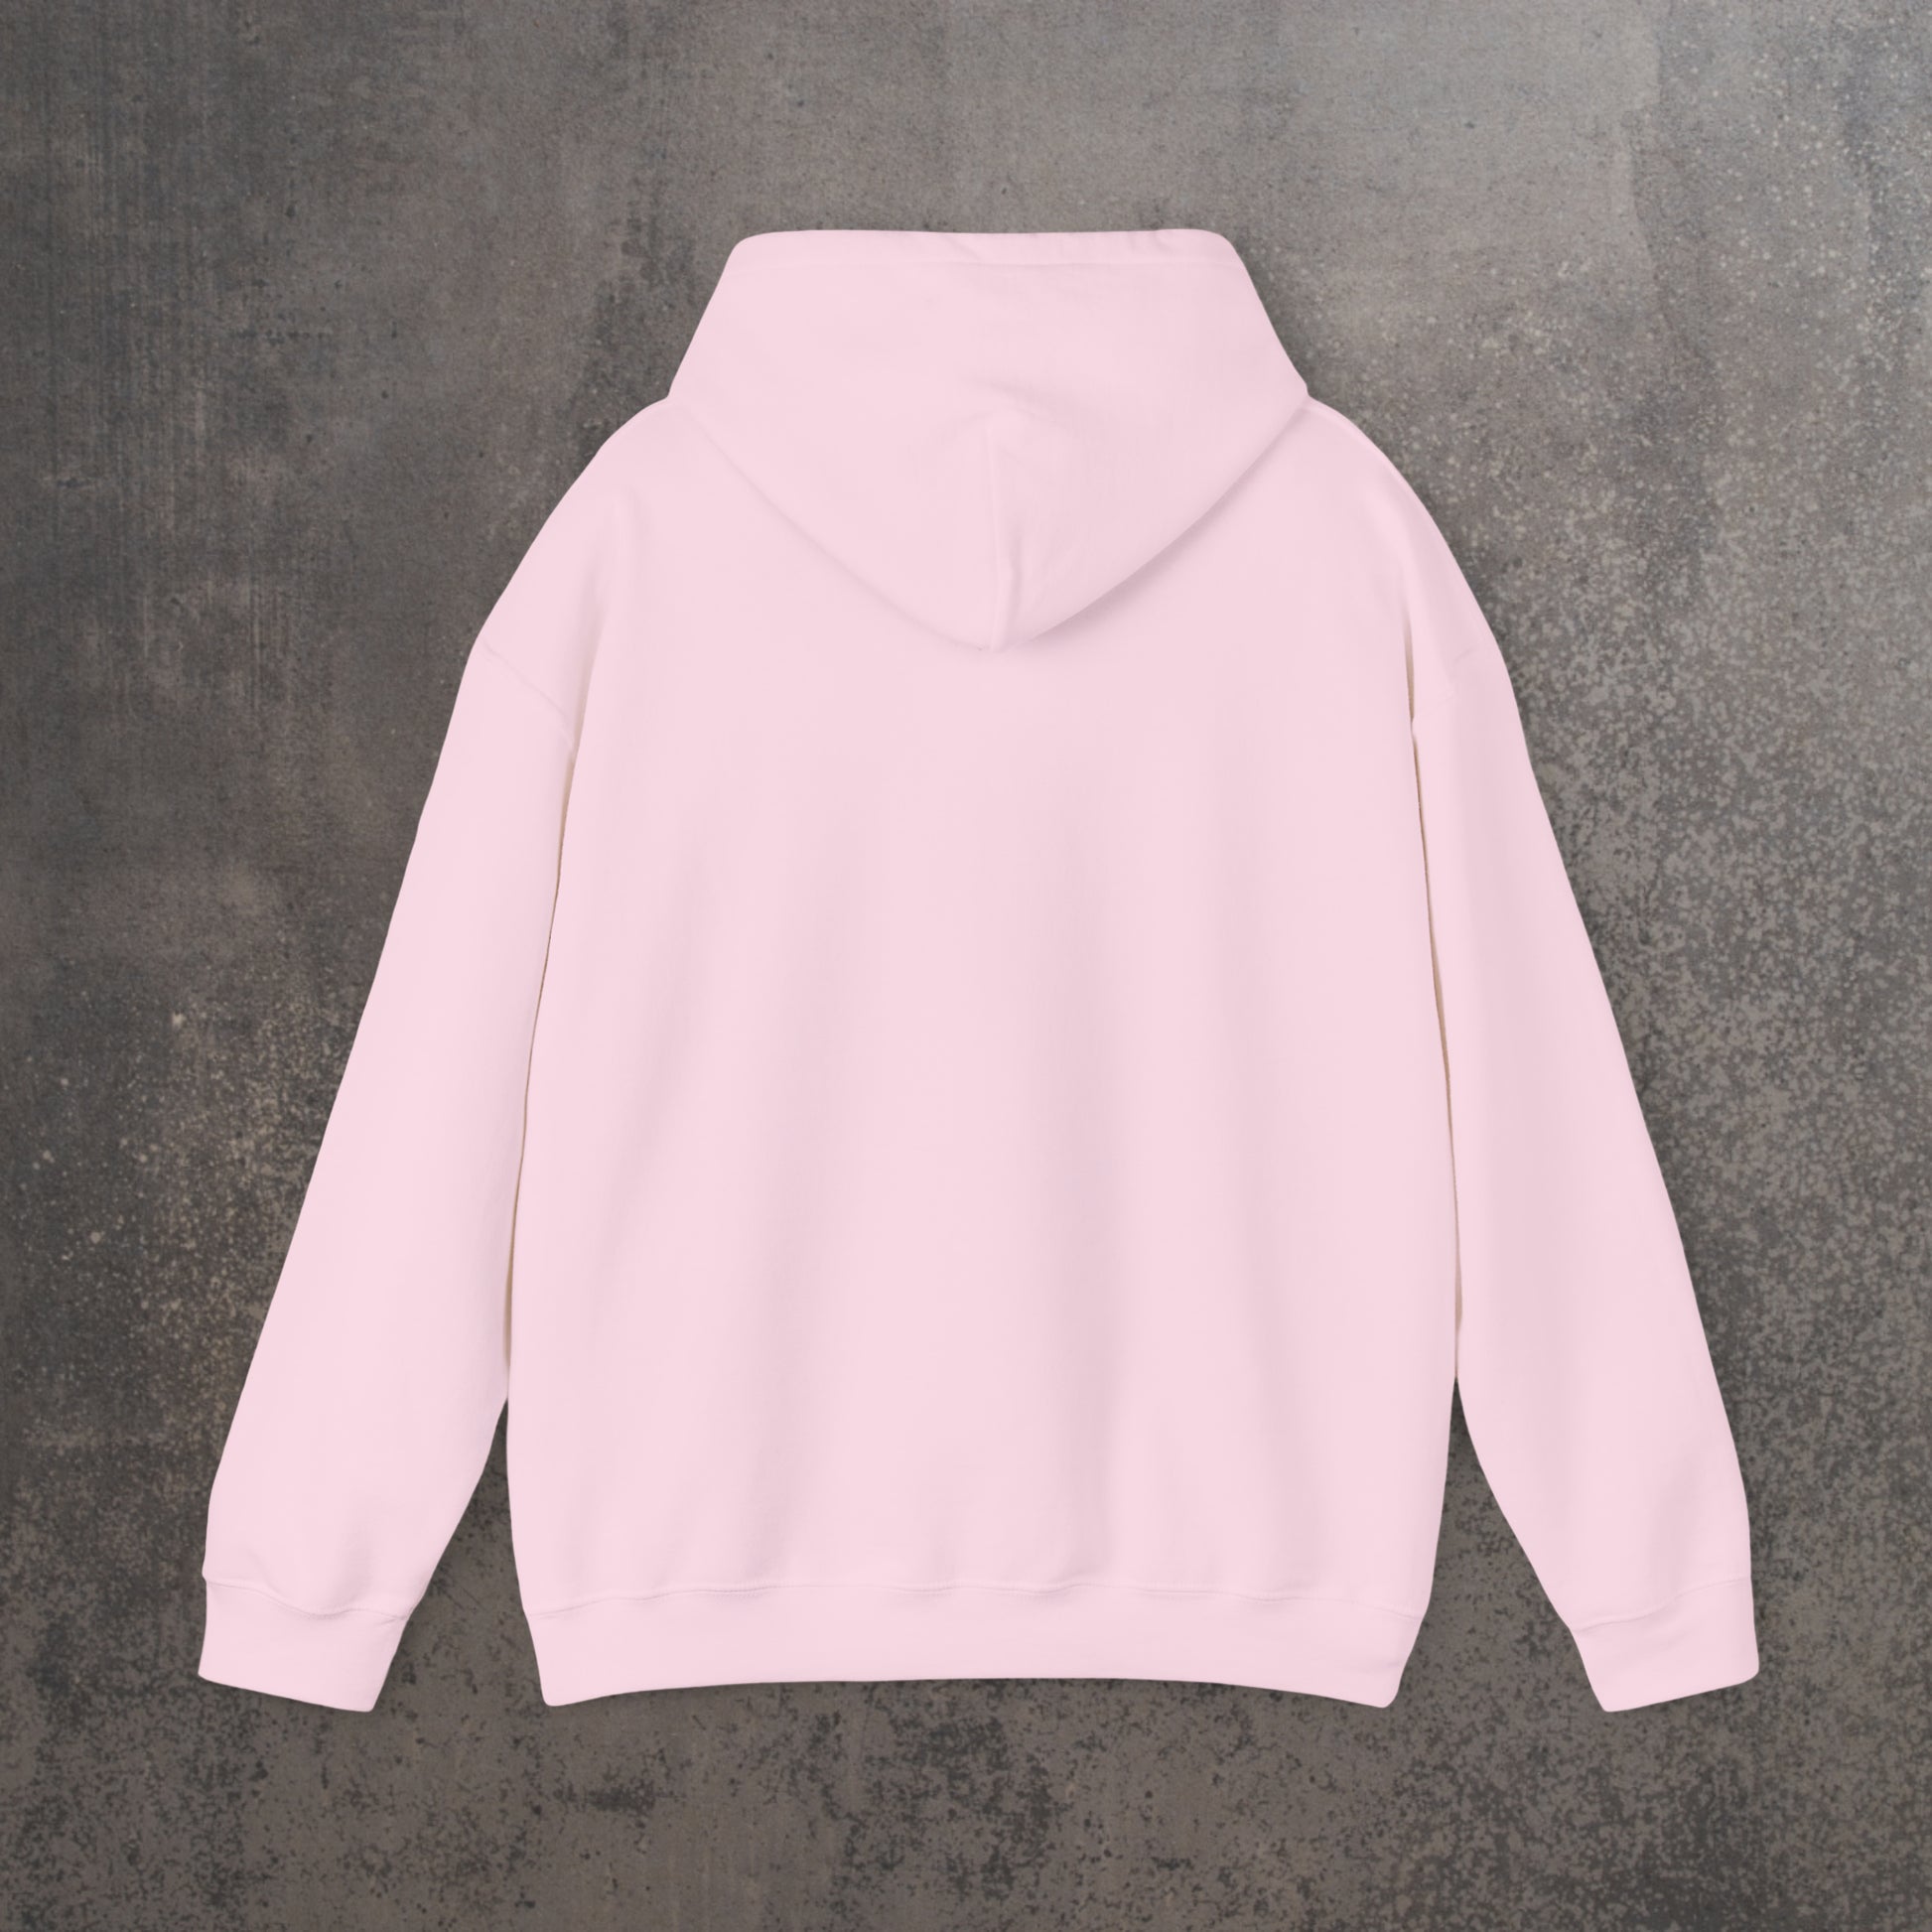 RECONZY Light Pink 'Trick or Treat Ghost' Pop-Punk Halloween Hoodie - Back View.